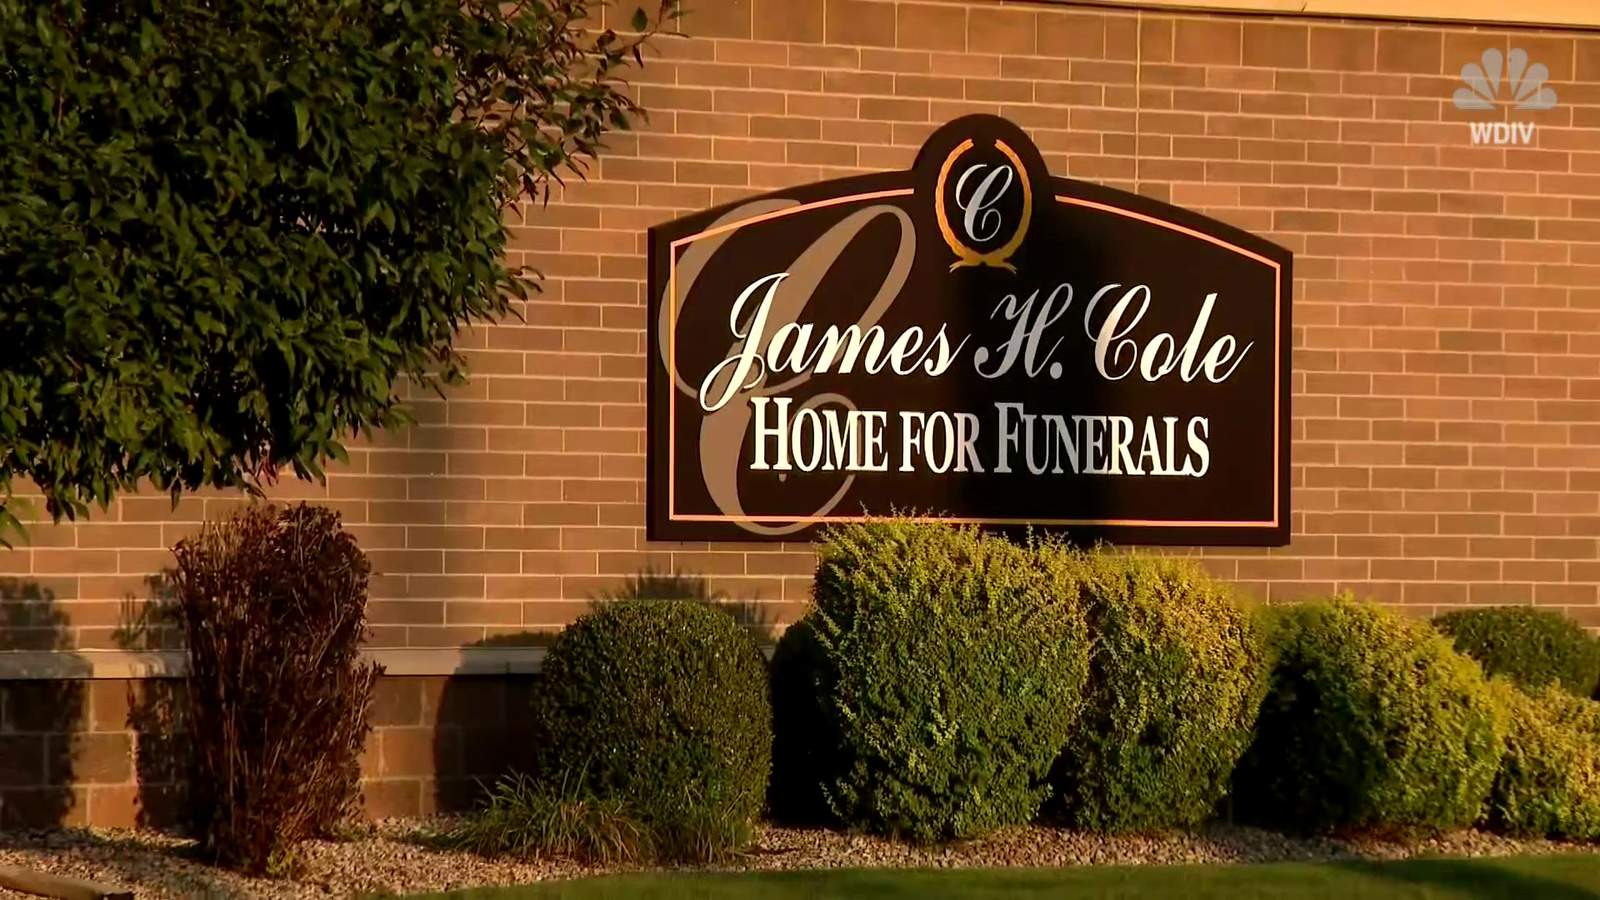 Dead woman found to be breathing at Detroit funeral home